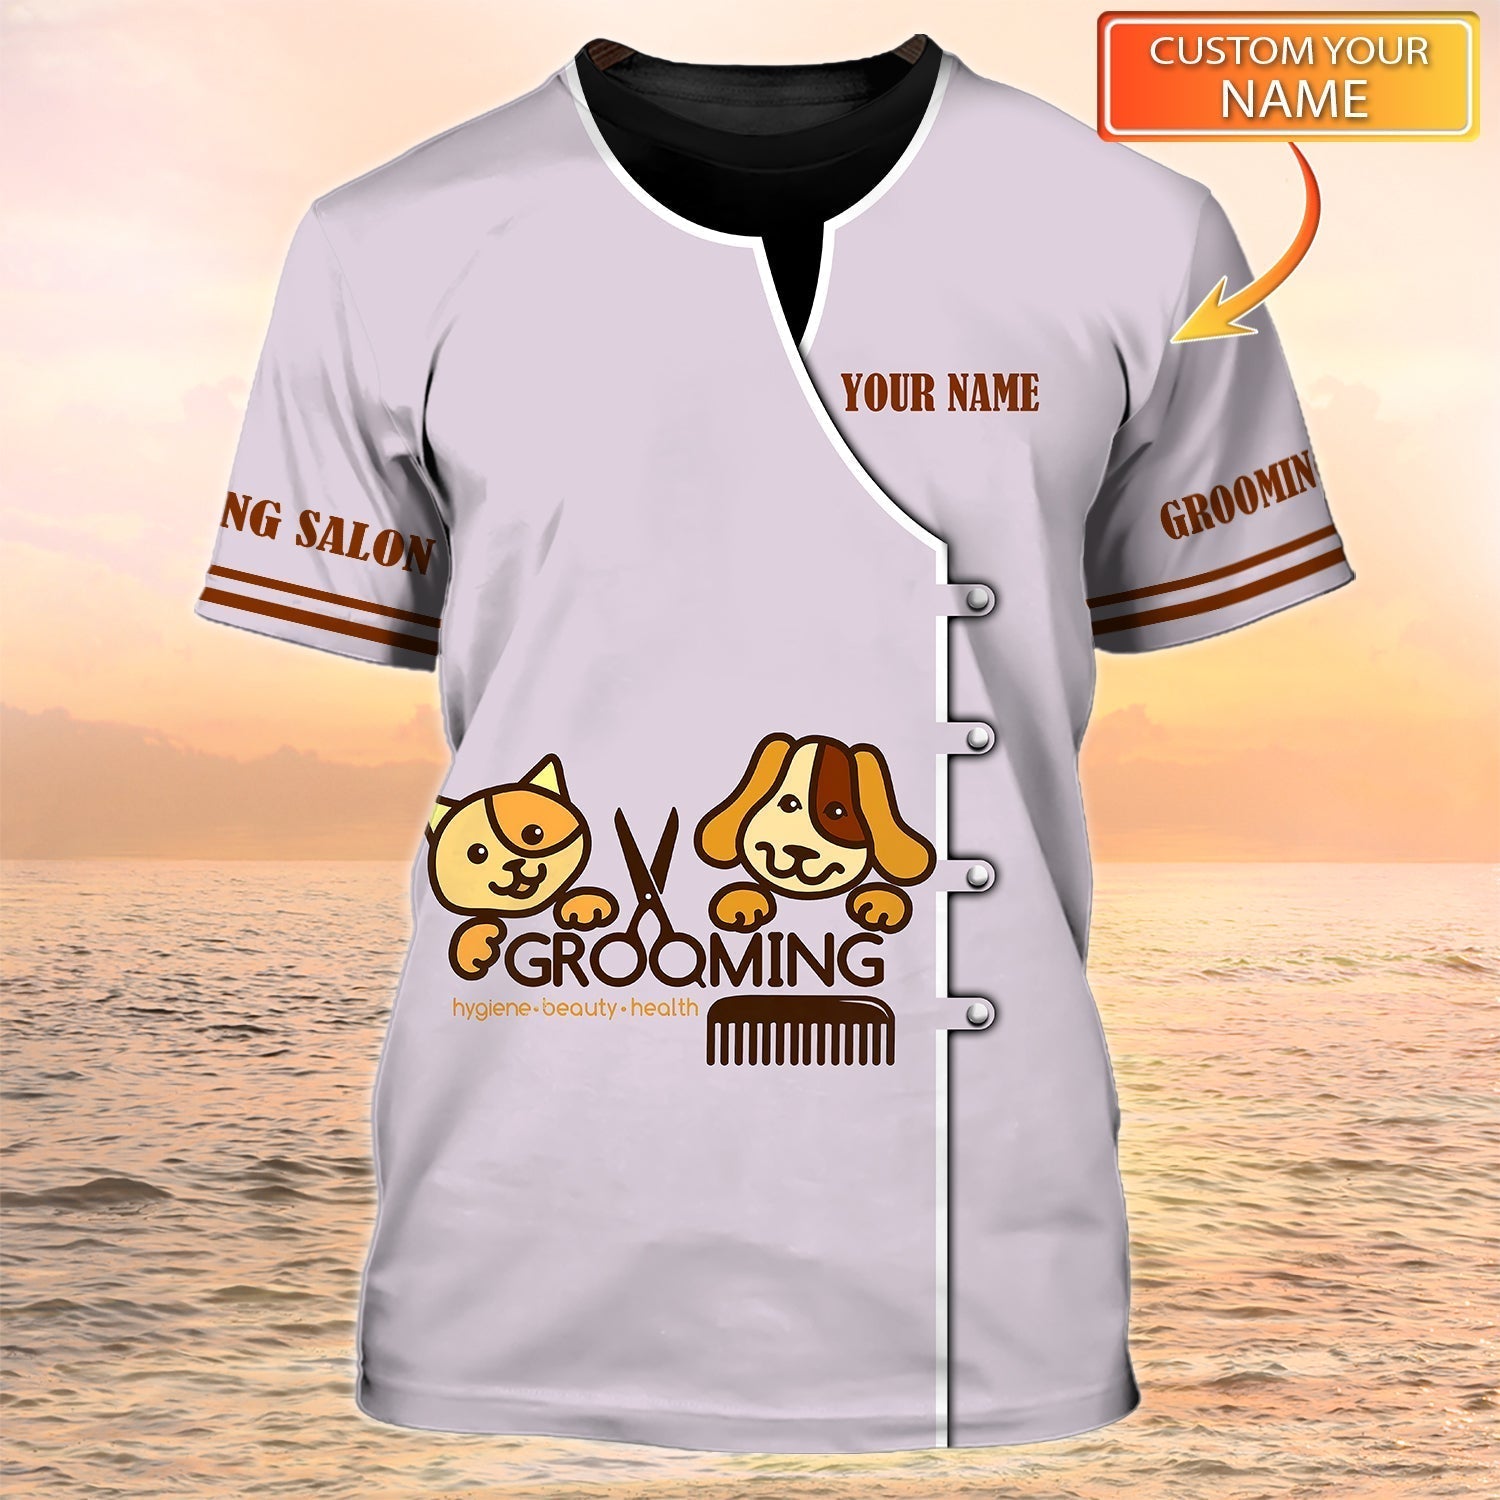 Personalized Name 3D Tshirt Grooming Salon Hygiene Beauty Health Shirts